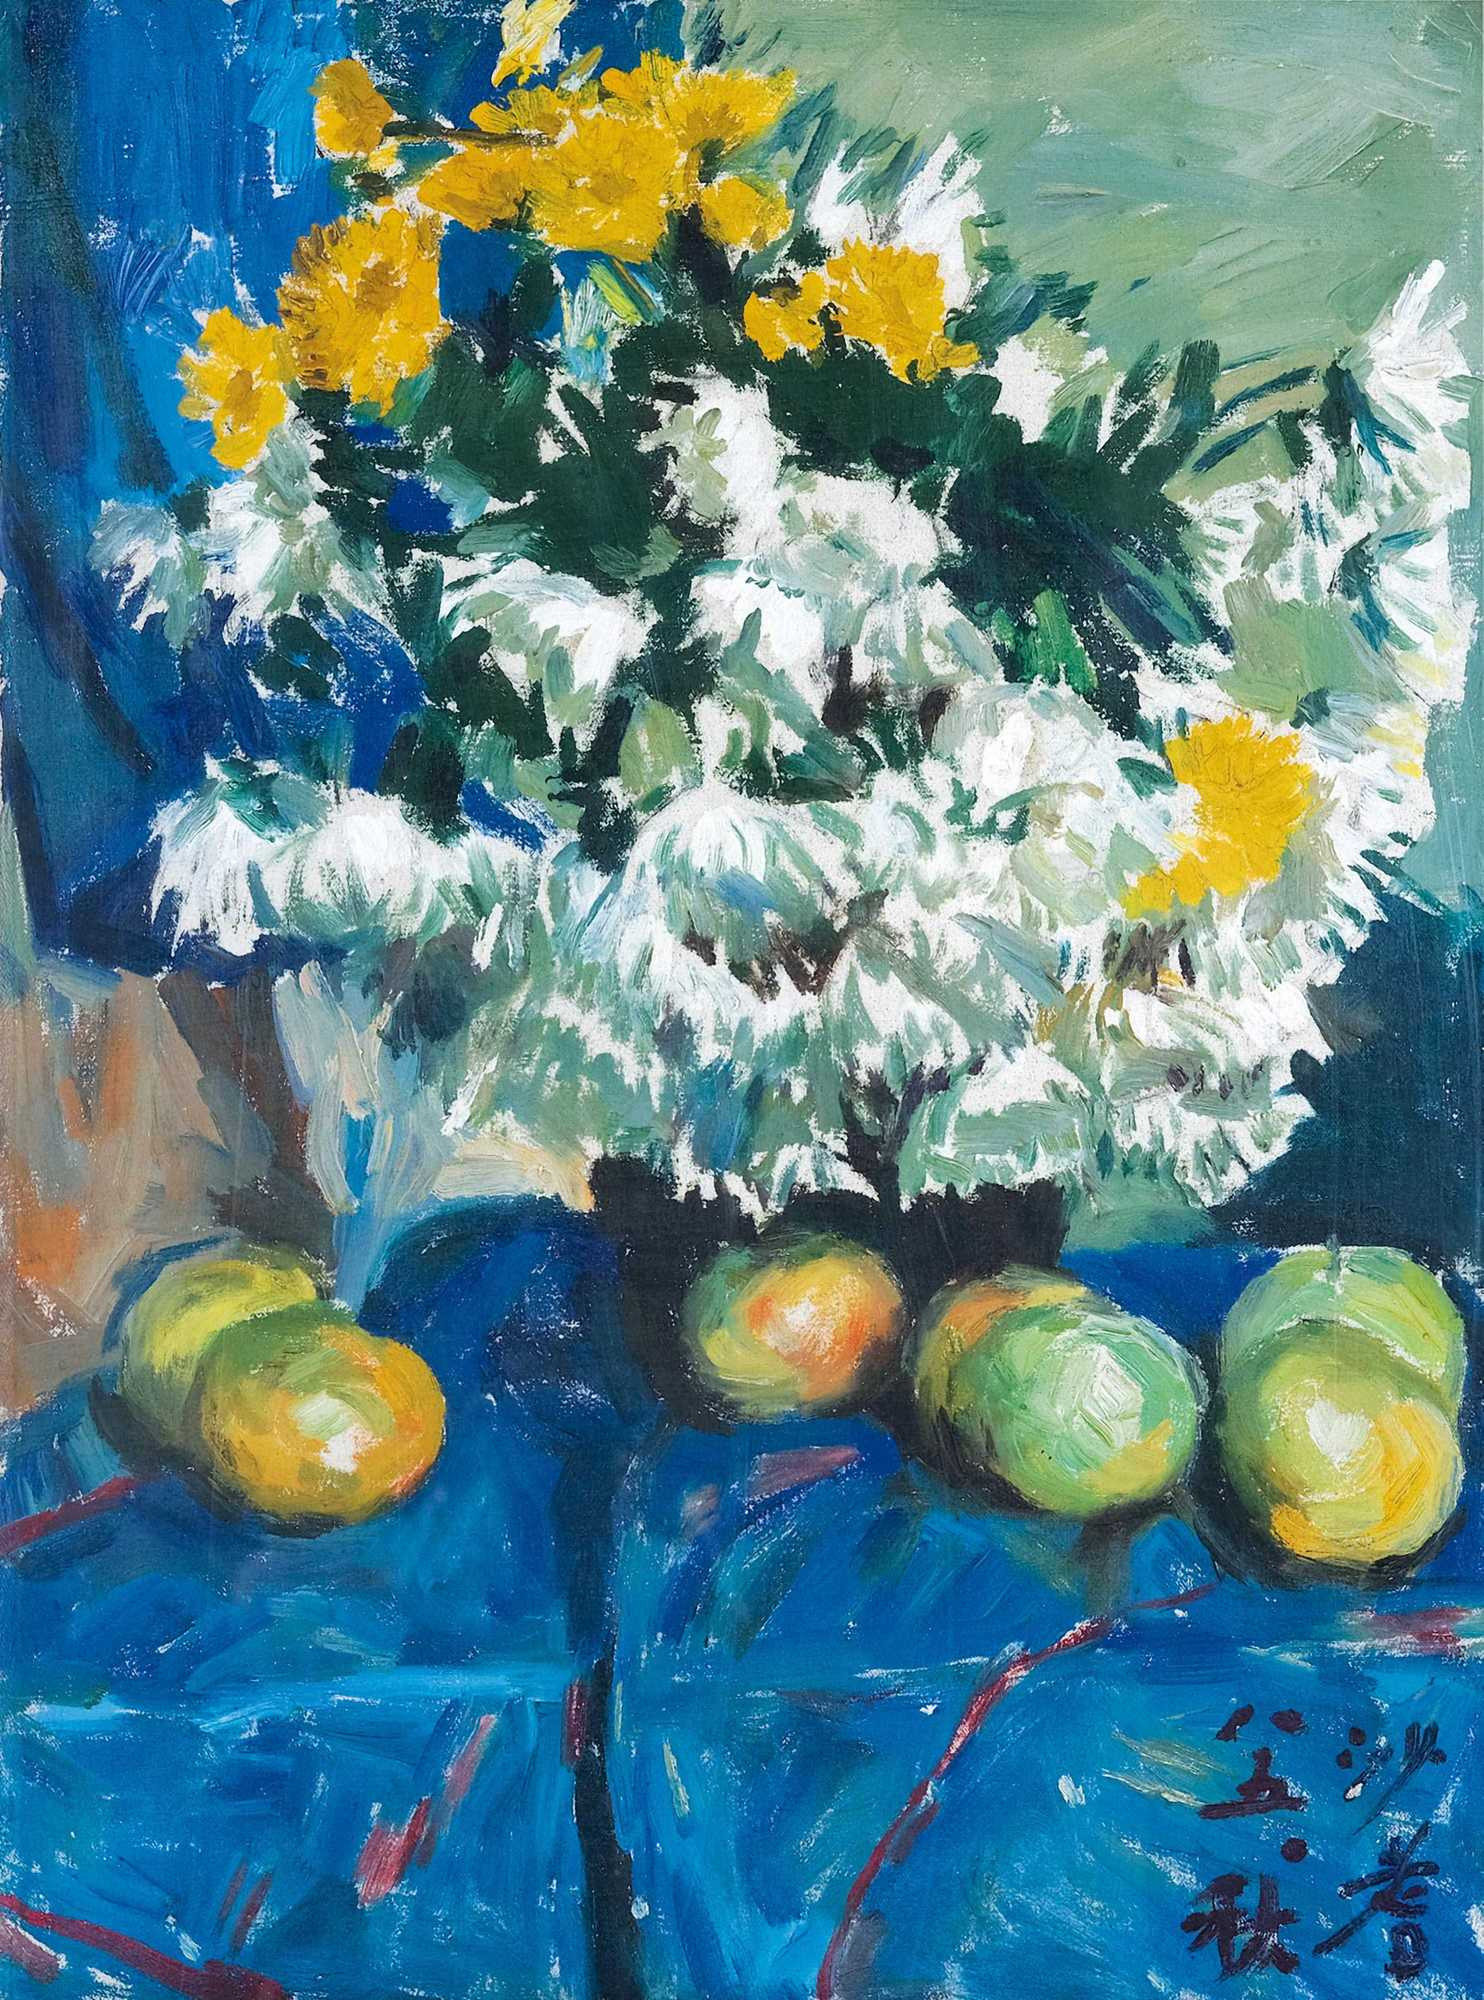 WHITE FLOWERS IN FRONT OF BLUE CLOTH